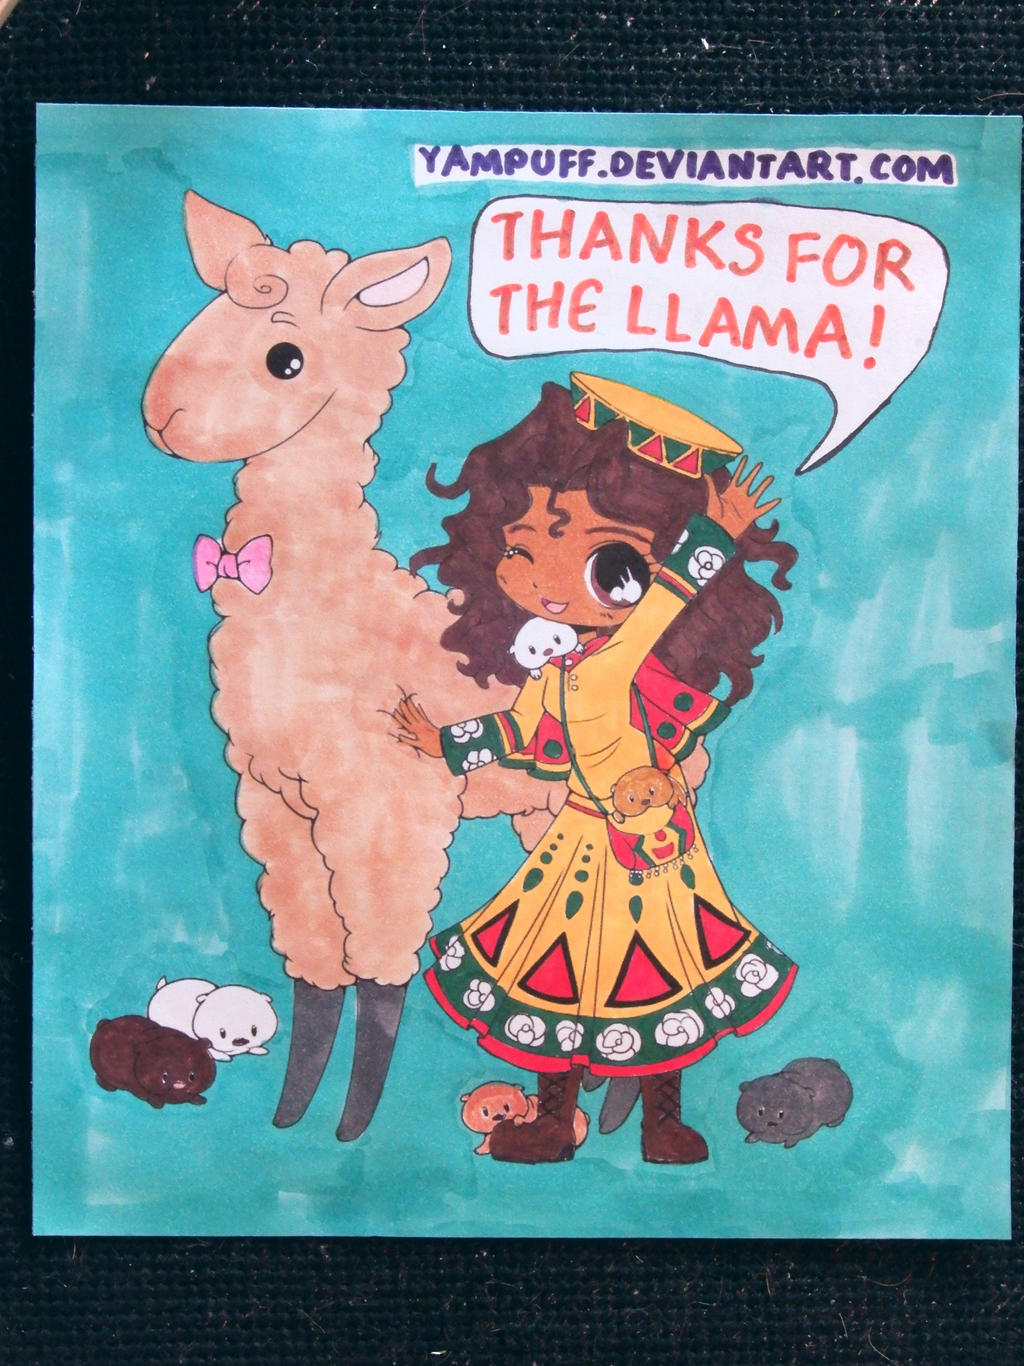 Thanks for the llama!